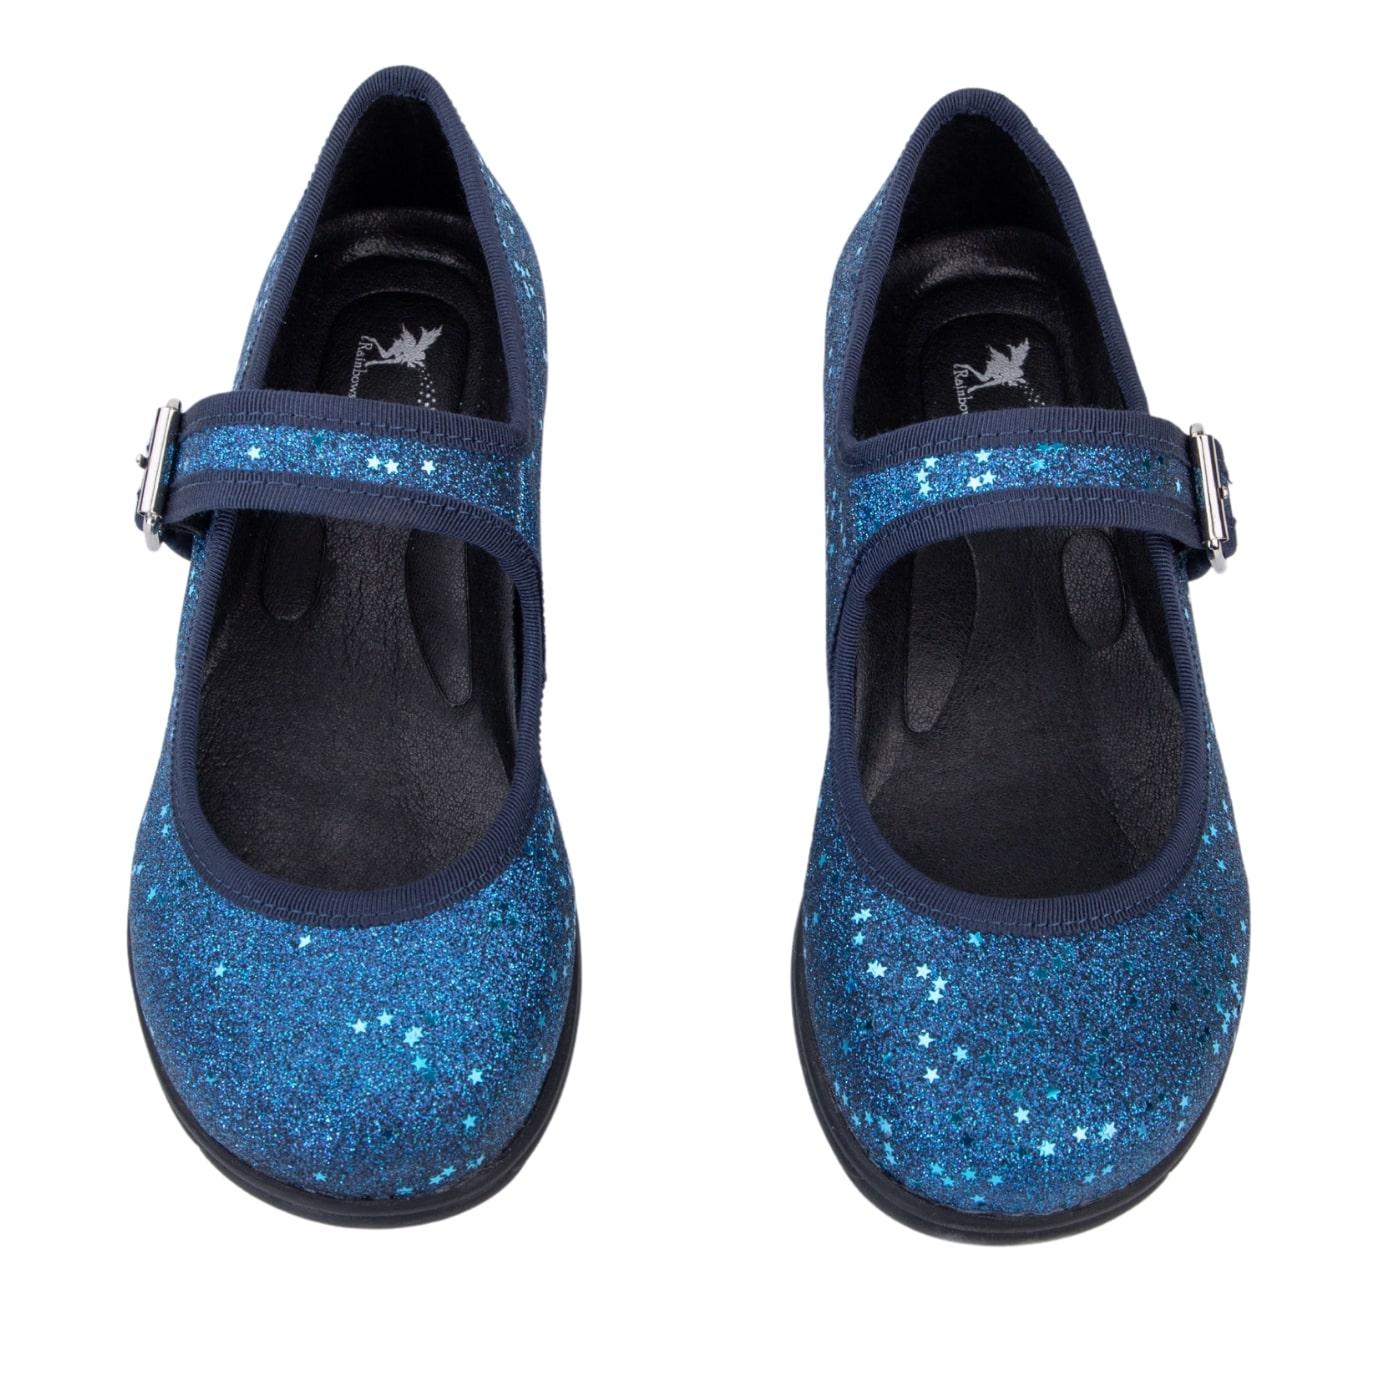 Sapphire Mary Janes by RainbowsAndFairies.com (Blue Glitter - Stars - Sparkle Shoes - Mary Janes - Buckle Up Shoes - Mismatched Shoes) - SKU: FW_MARYJ_SAPPH_ORG - Pic 02